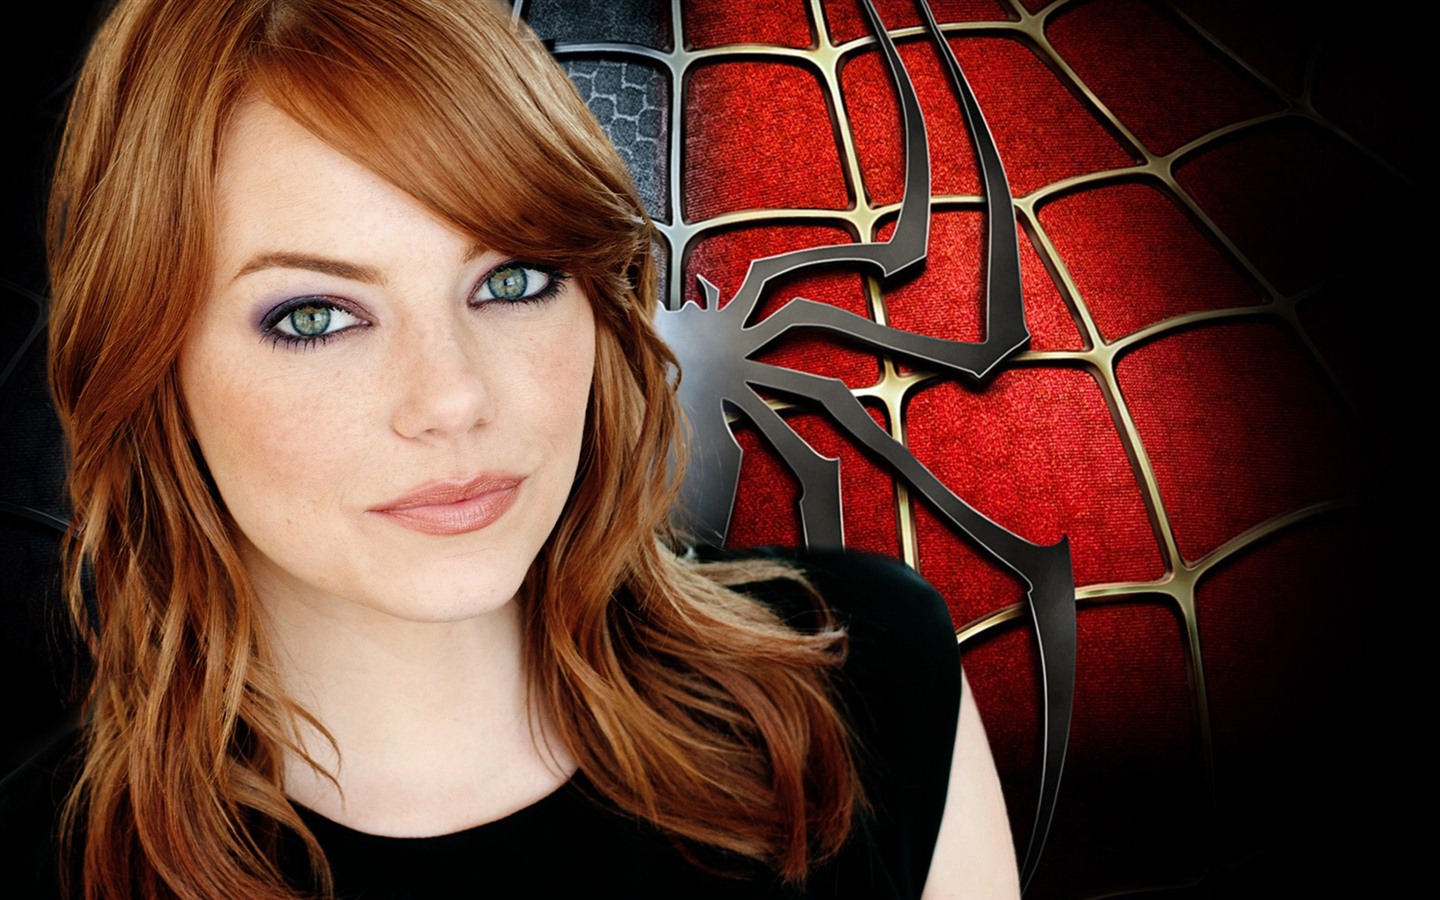 Le 2012 Amazing Spider-Man wallpapers #9 - 1440x900